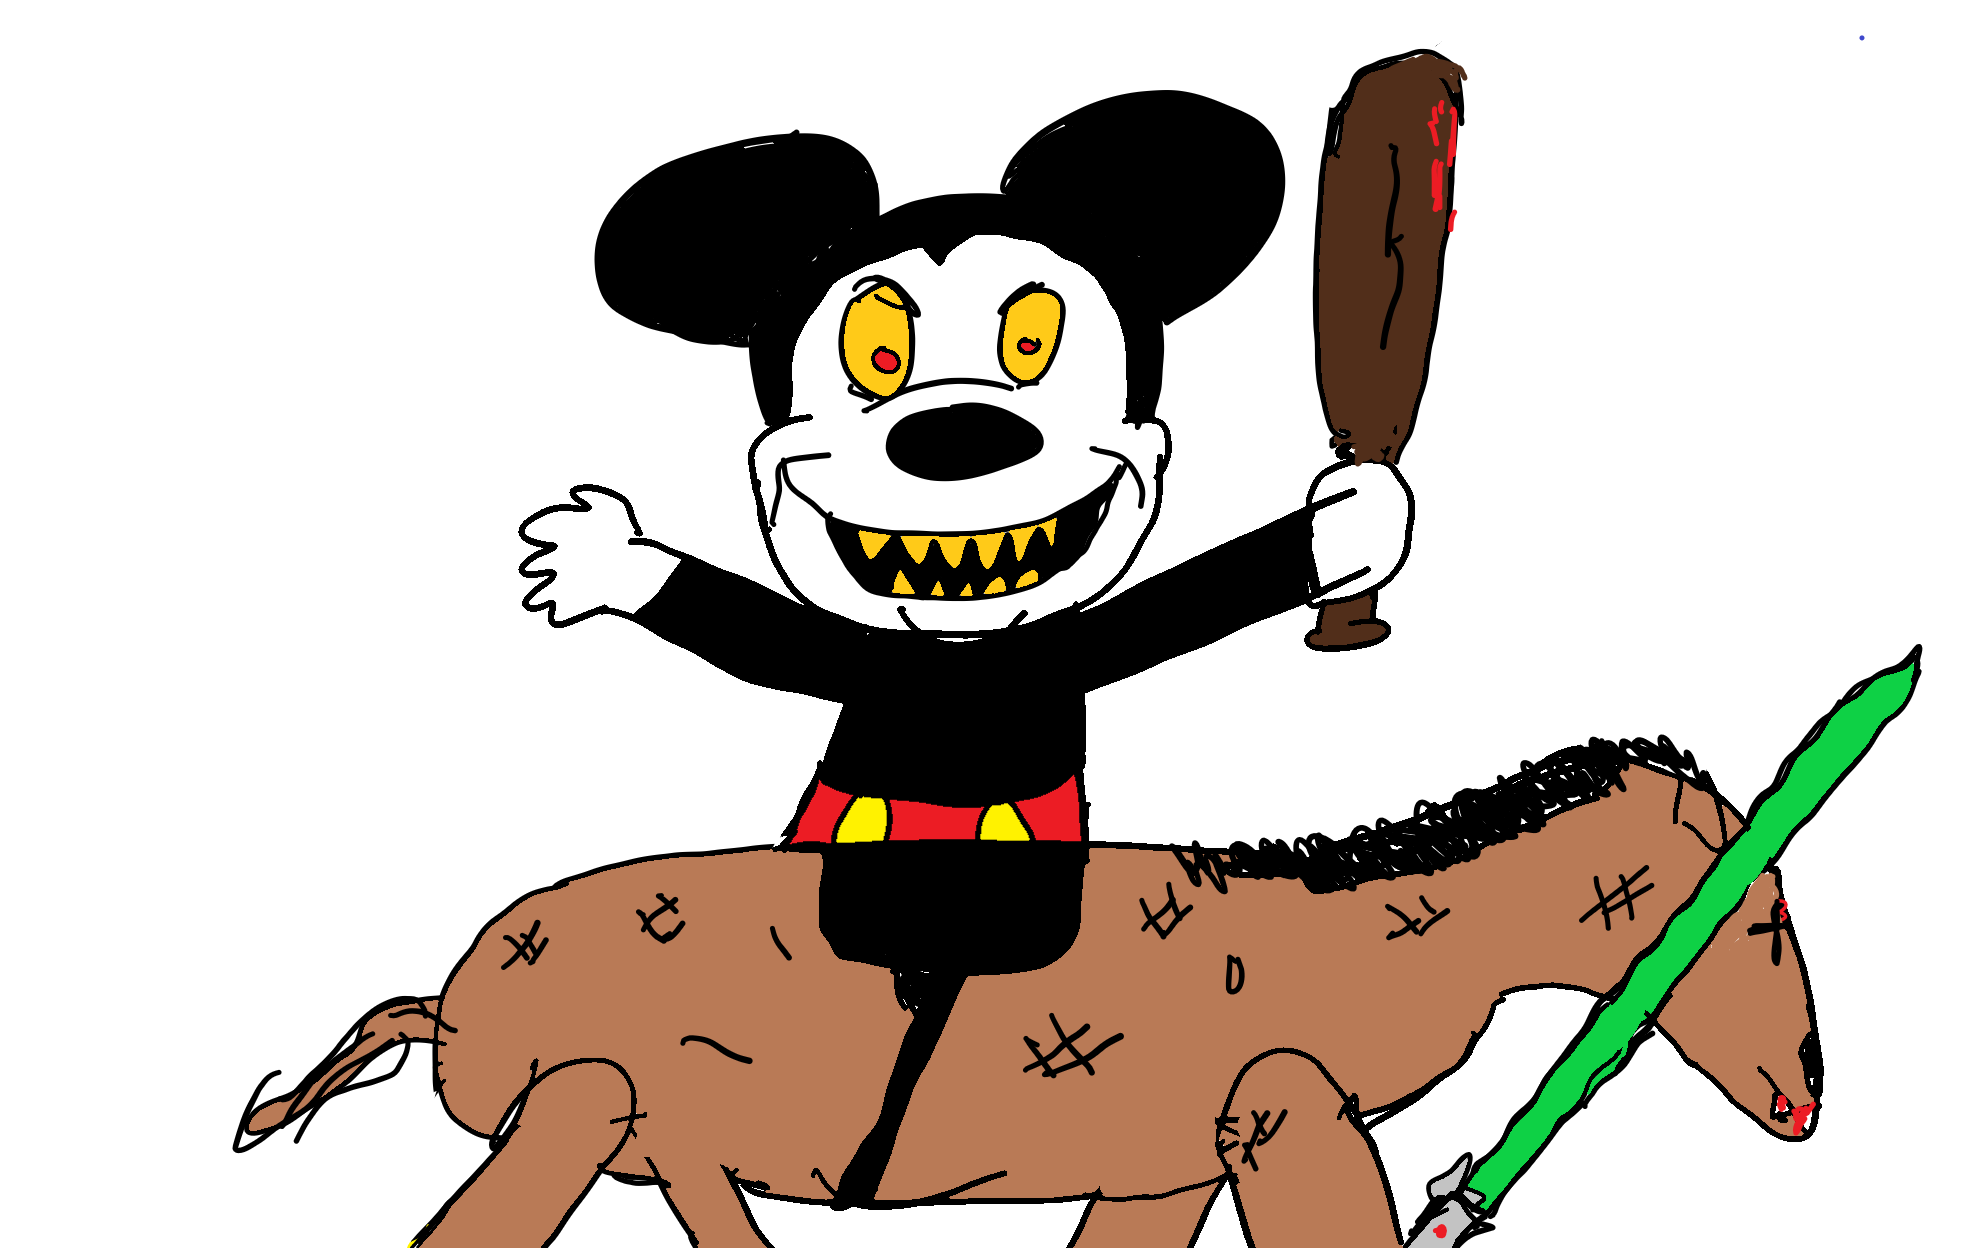 The cartoon shows Mickey Mouse, representing the Walt Disney company, beating a dead horse with a bat. The Star Wars franchise has become this poor animal under Disney’s tenure of derivative plotlines, lack of planning, and overall disrespect to the dead.